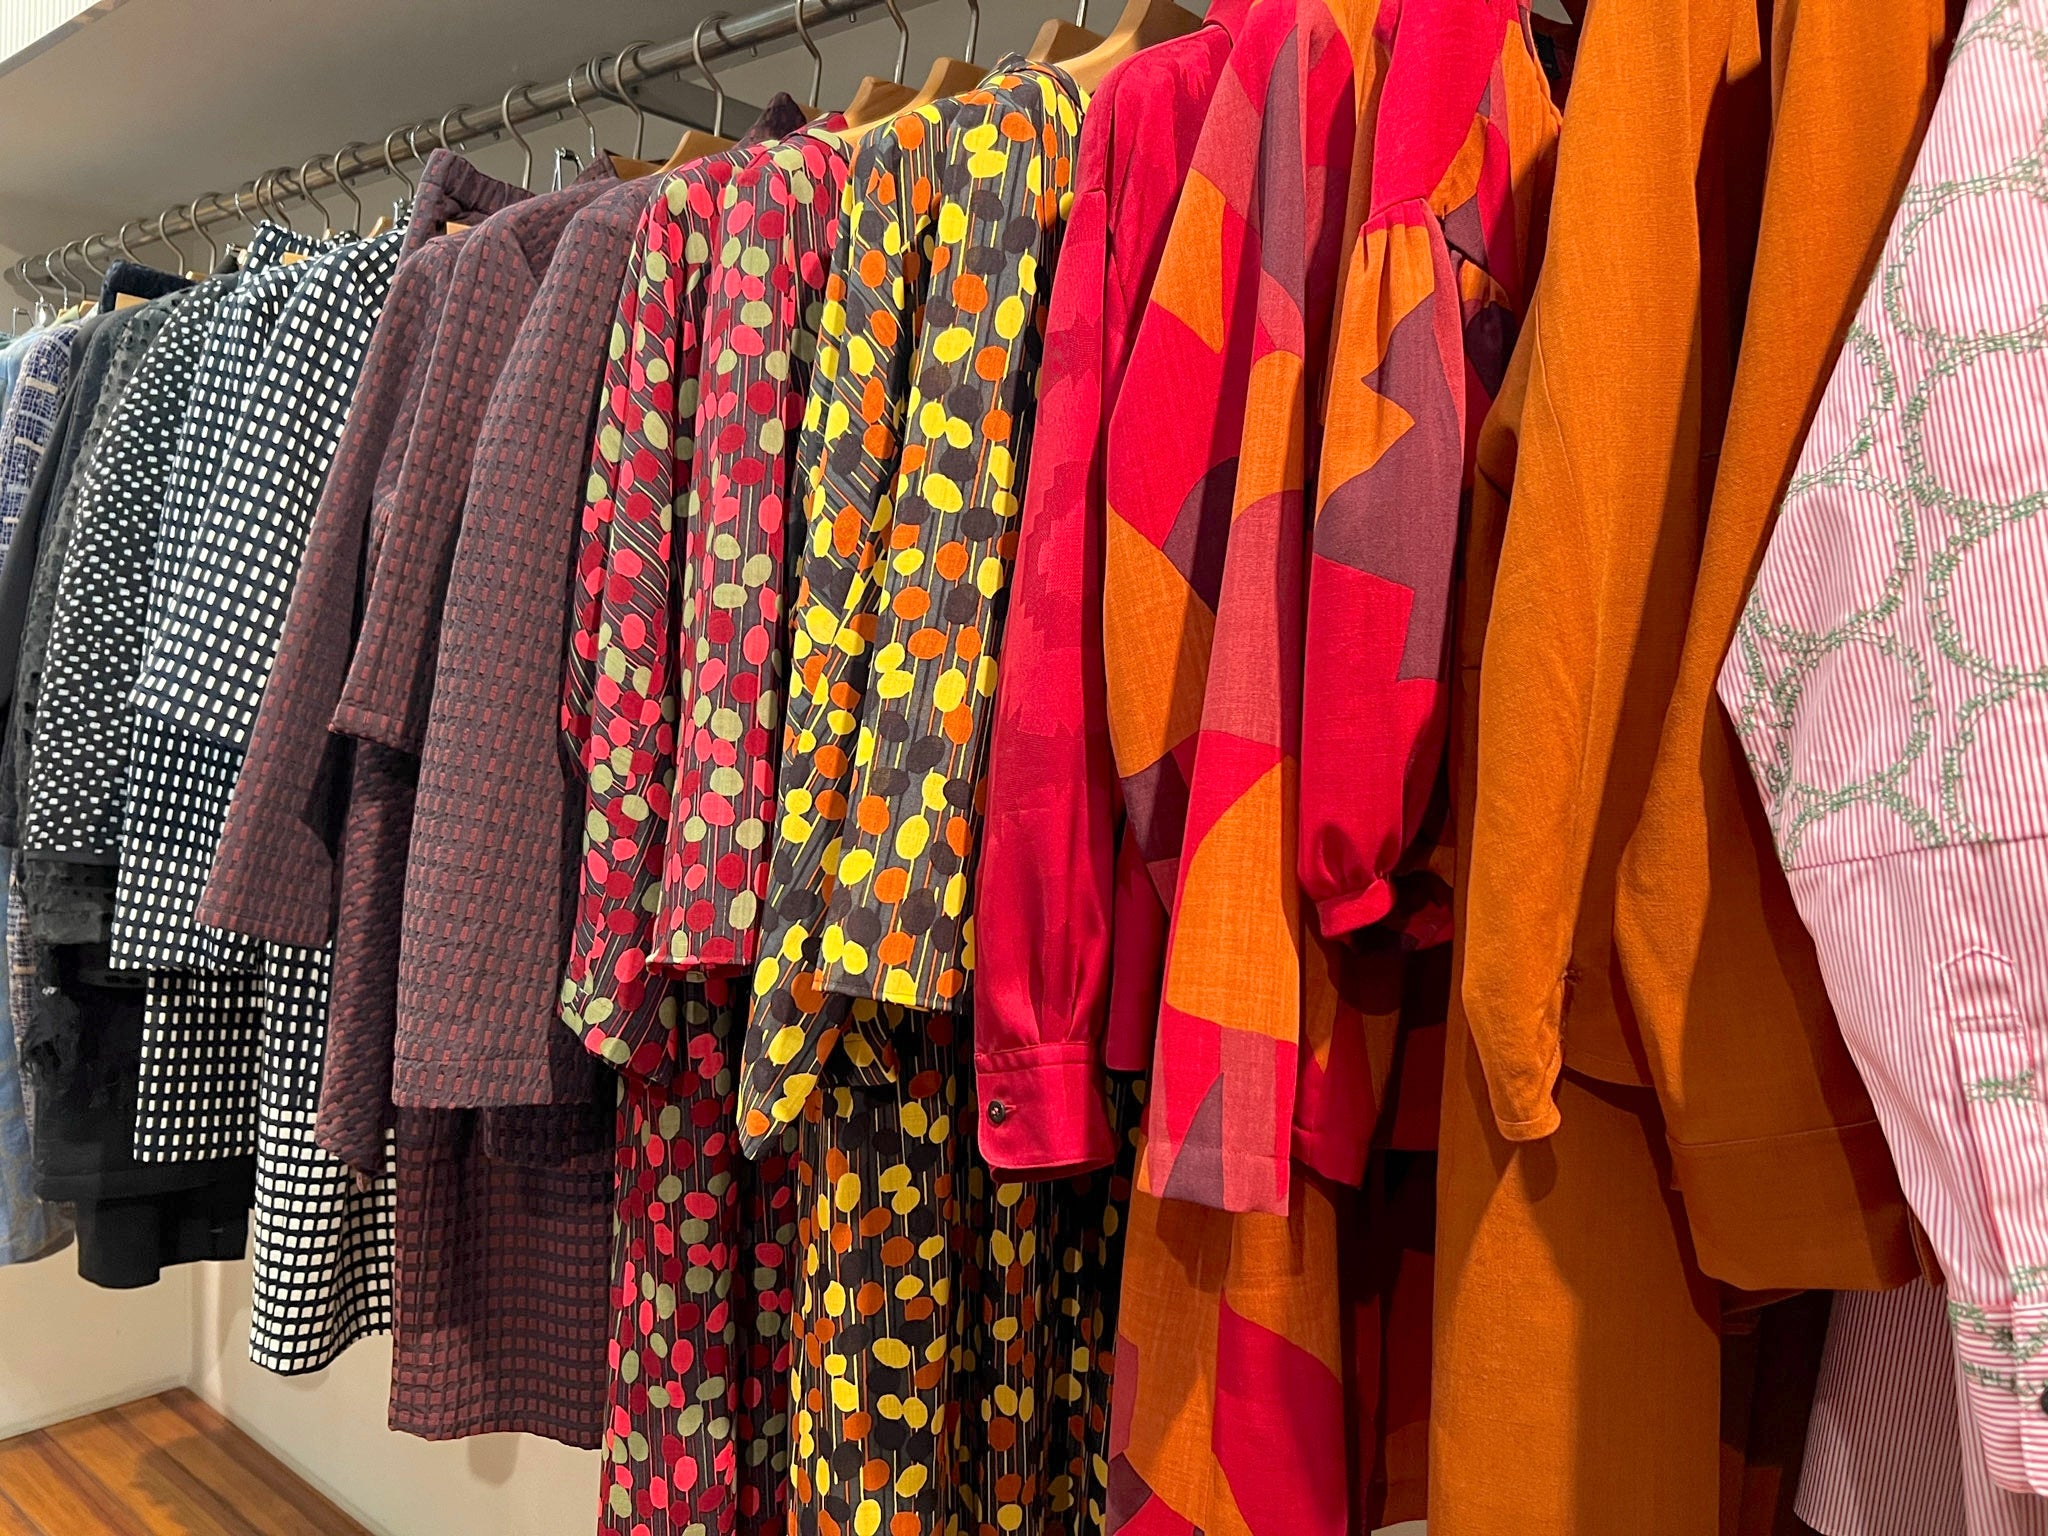 Impeccable clothing at Nuno in Tokyo